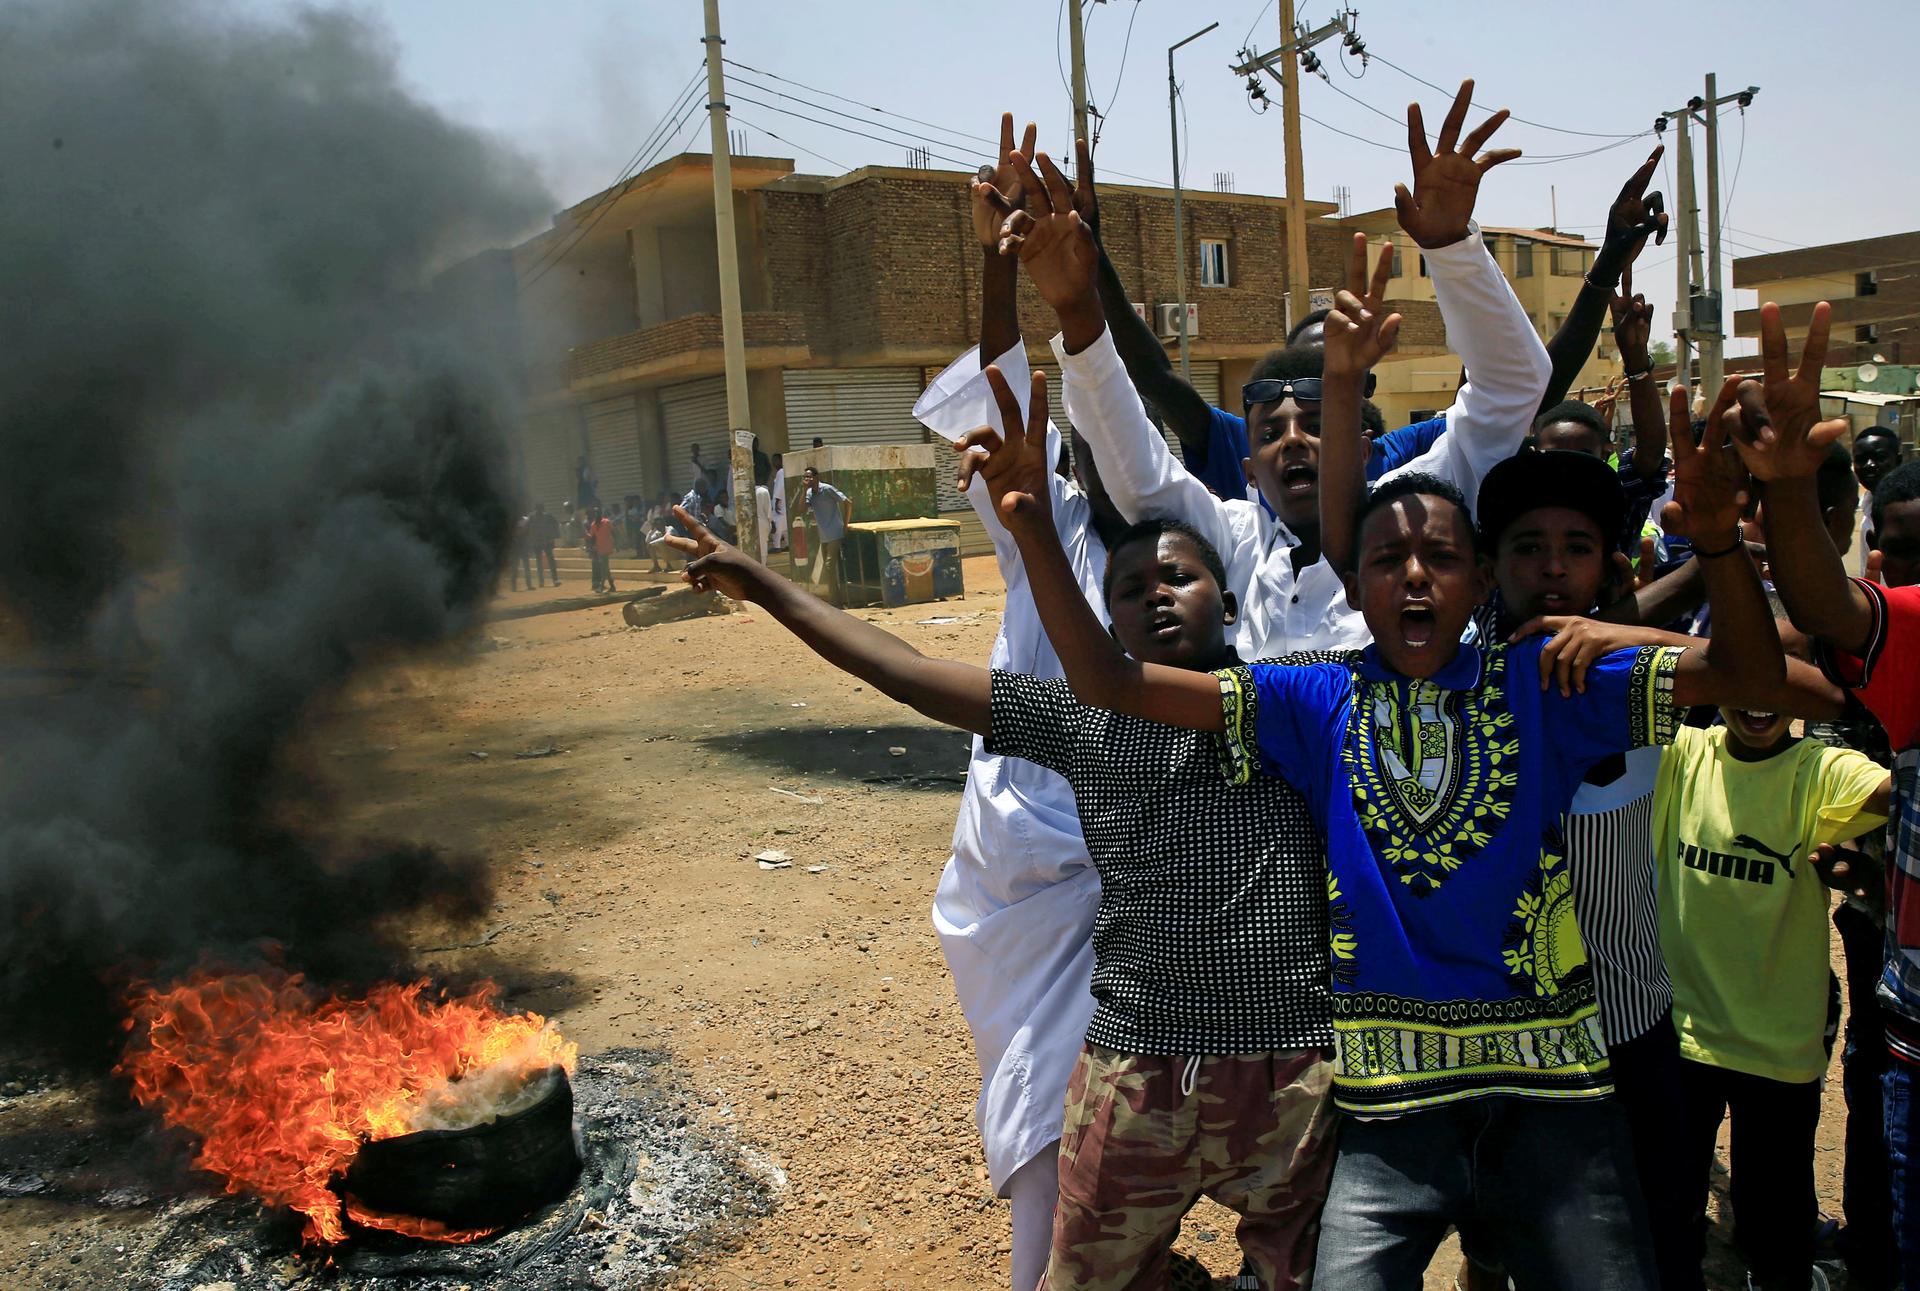 Sudanese protesters gesture and chant slogans at a barricade along a street, demanding that the country's Transitional Military Council hand over power to civilians, in Khartoum, Sudan June 5, 2019